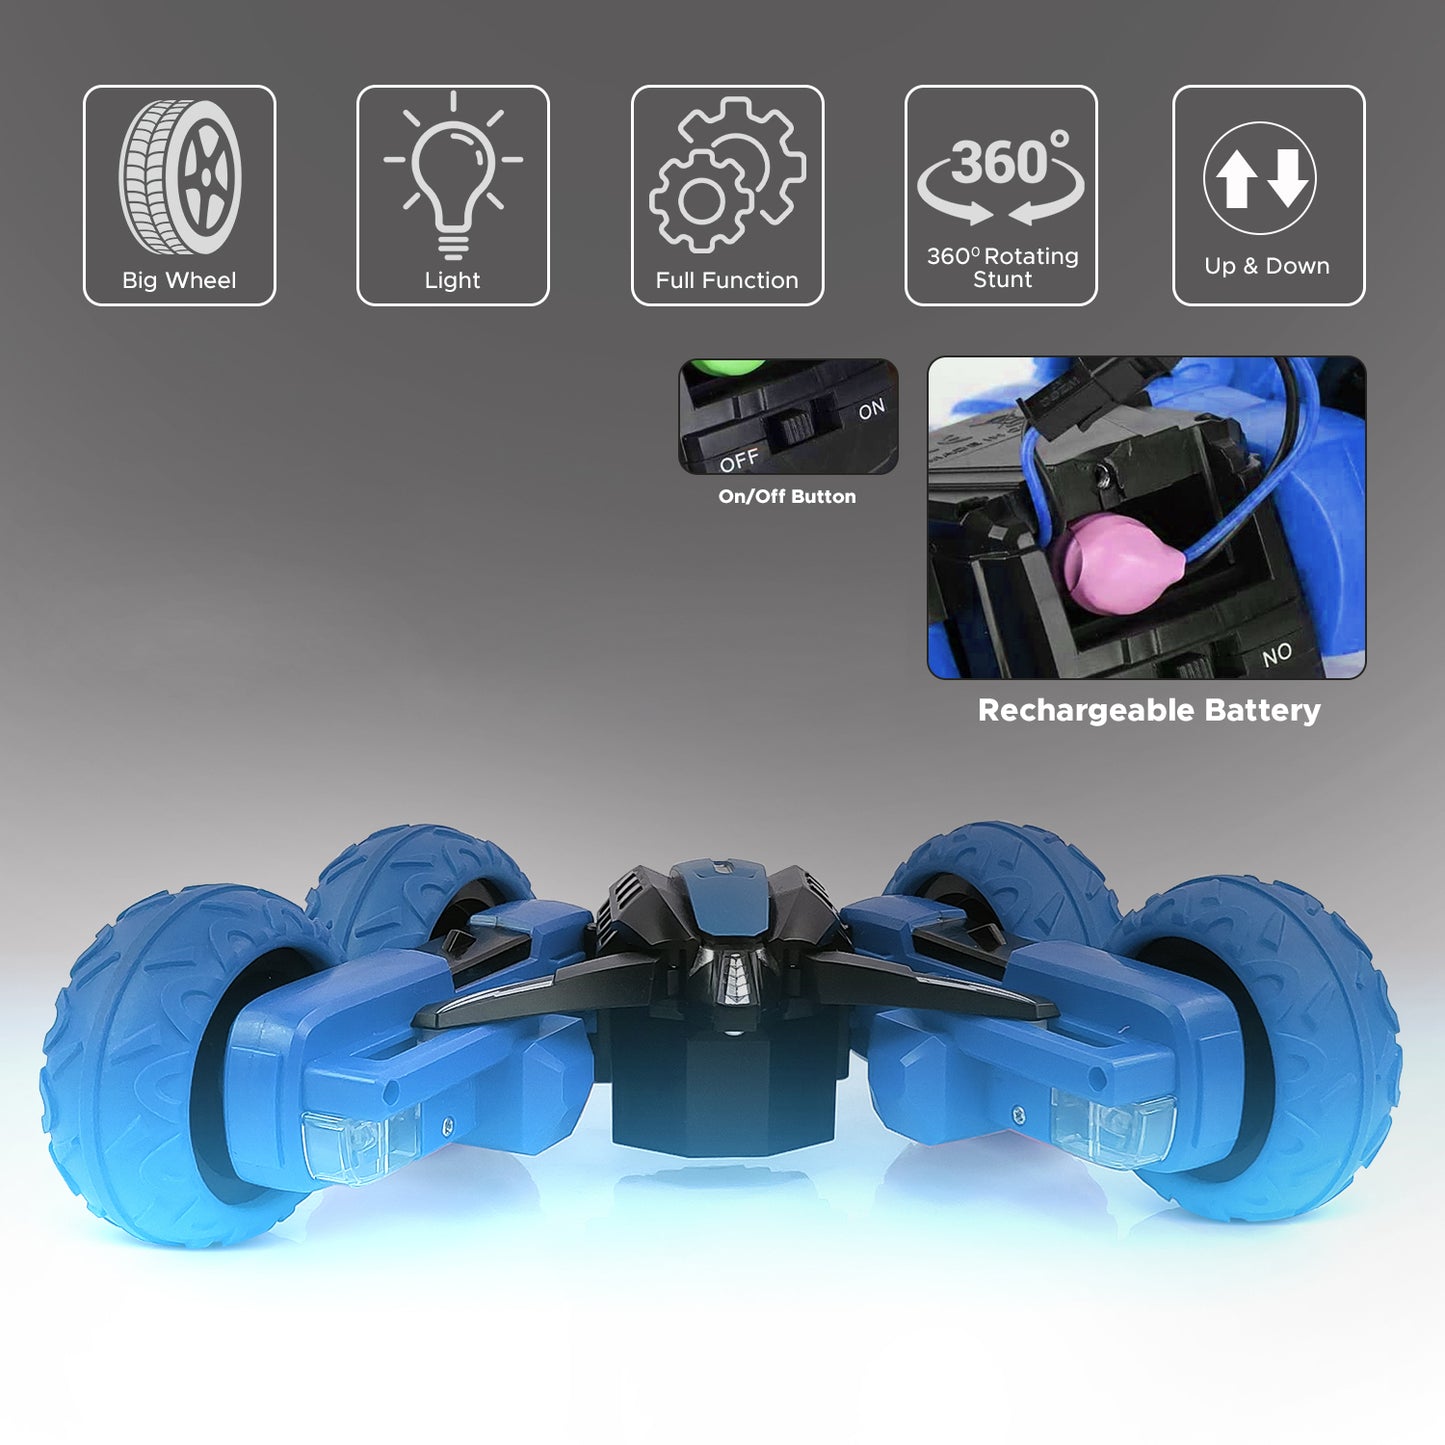 NHR 360° Rotating Stunt RC Car with LED Lights (Choose Any Color)